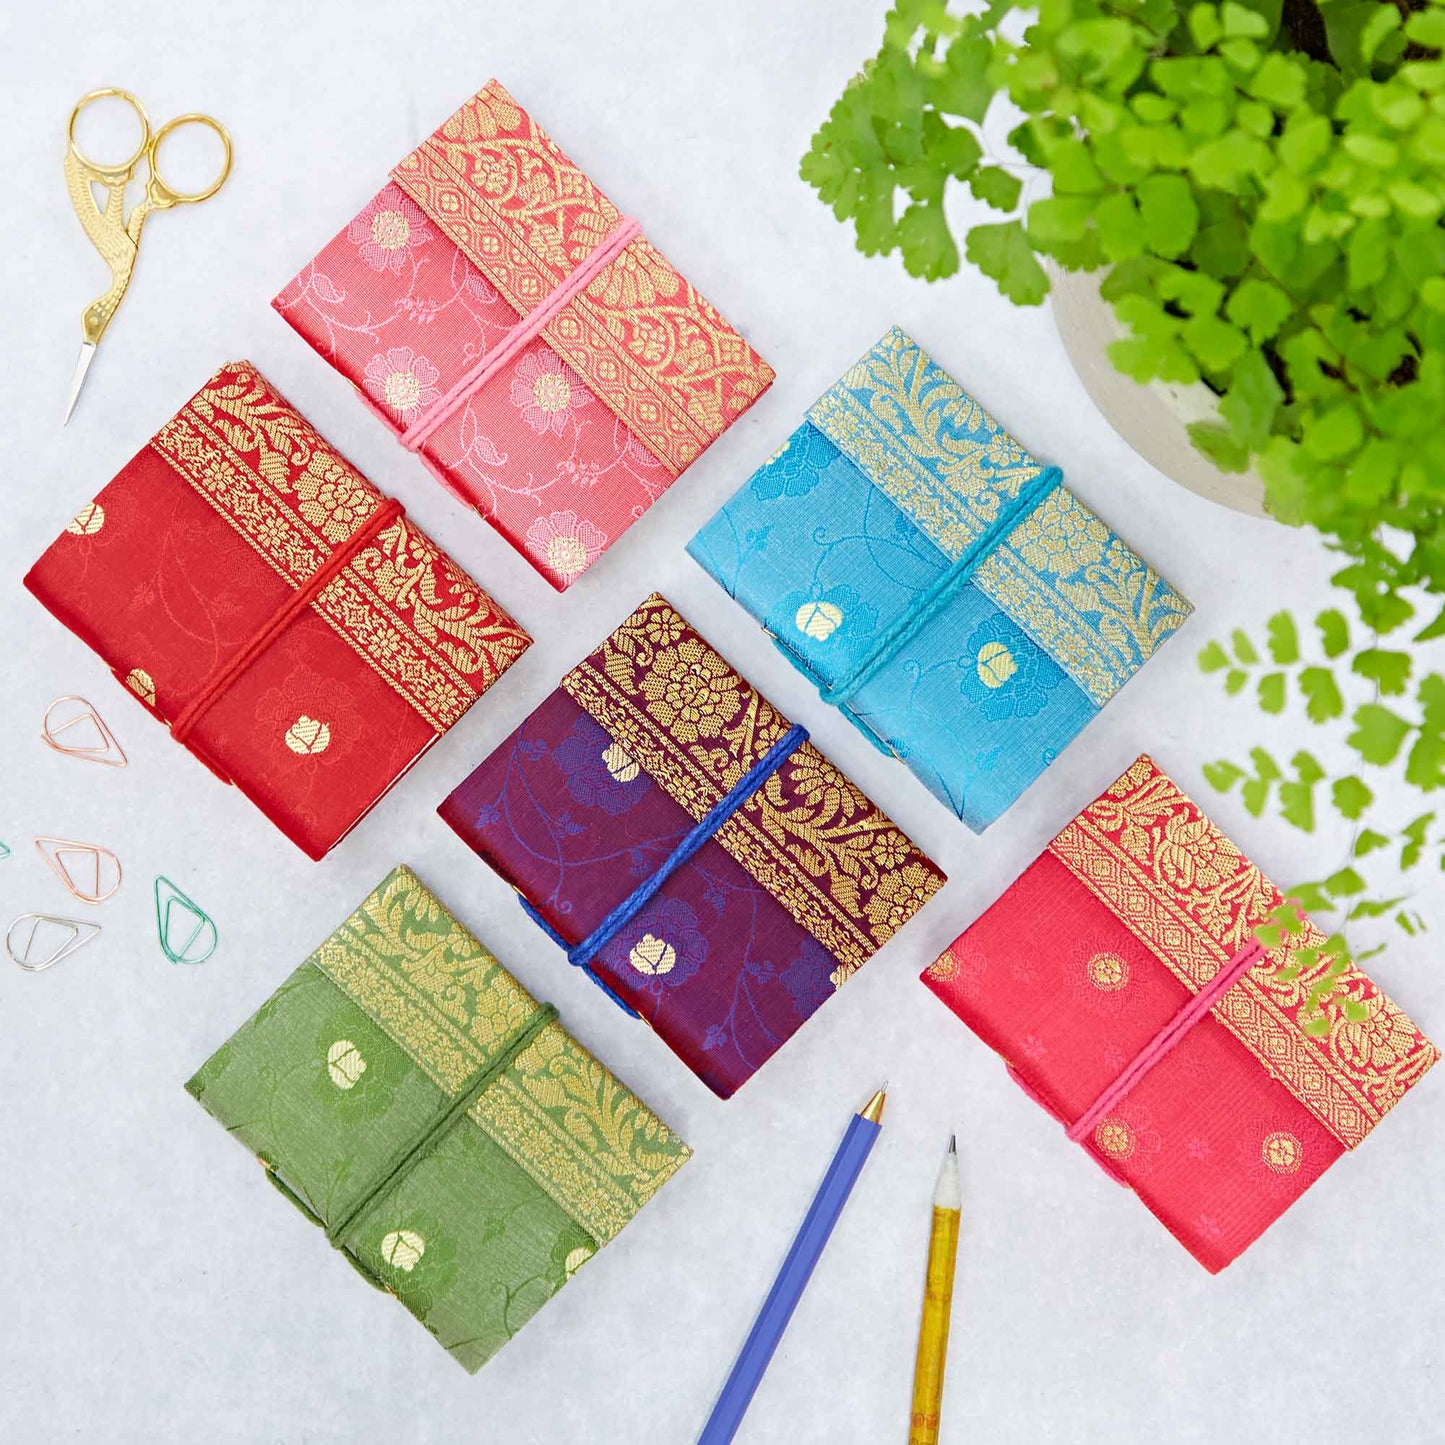 Pocket Sized Handmade Sari Journal in 6 colors from Paper High